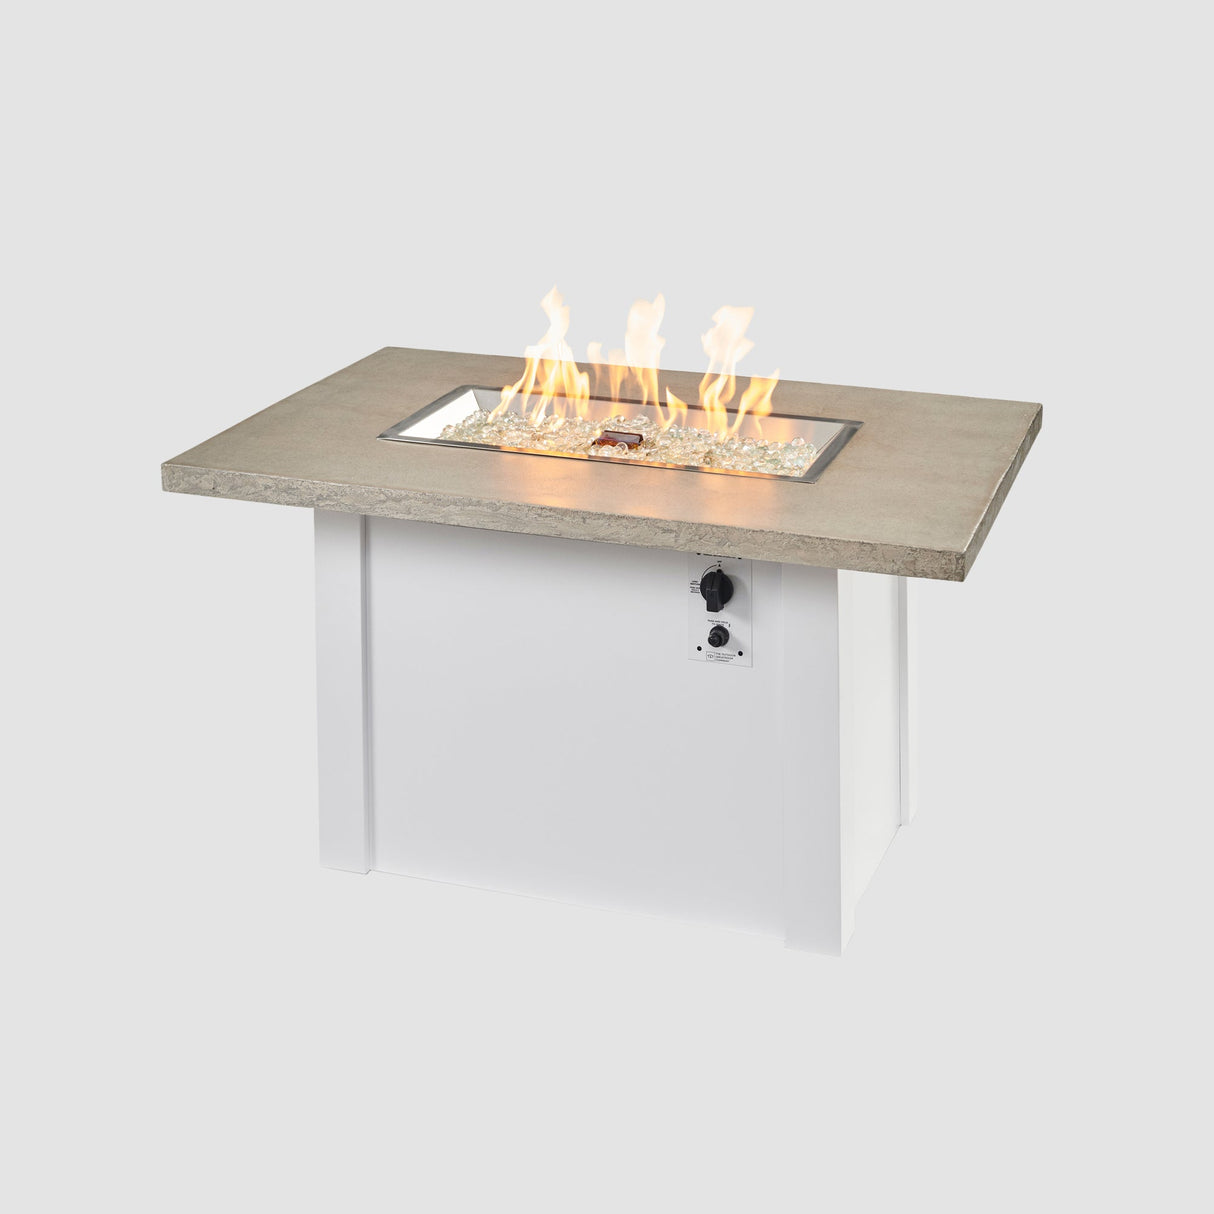 A large flame coming off the burner of a Havenwood Rectangular Gas Fire Pit Table with a Pebble Grey top and White base